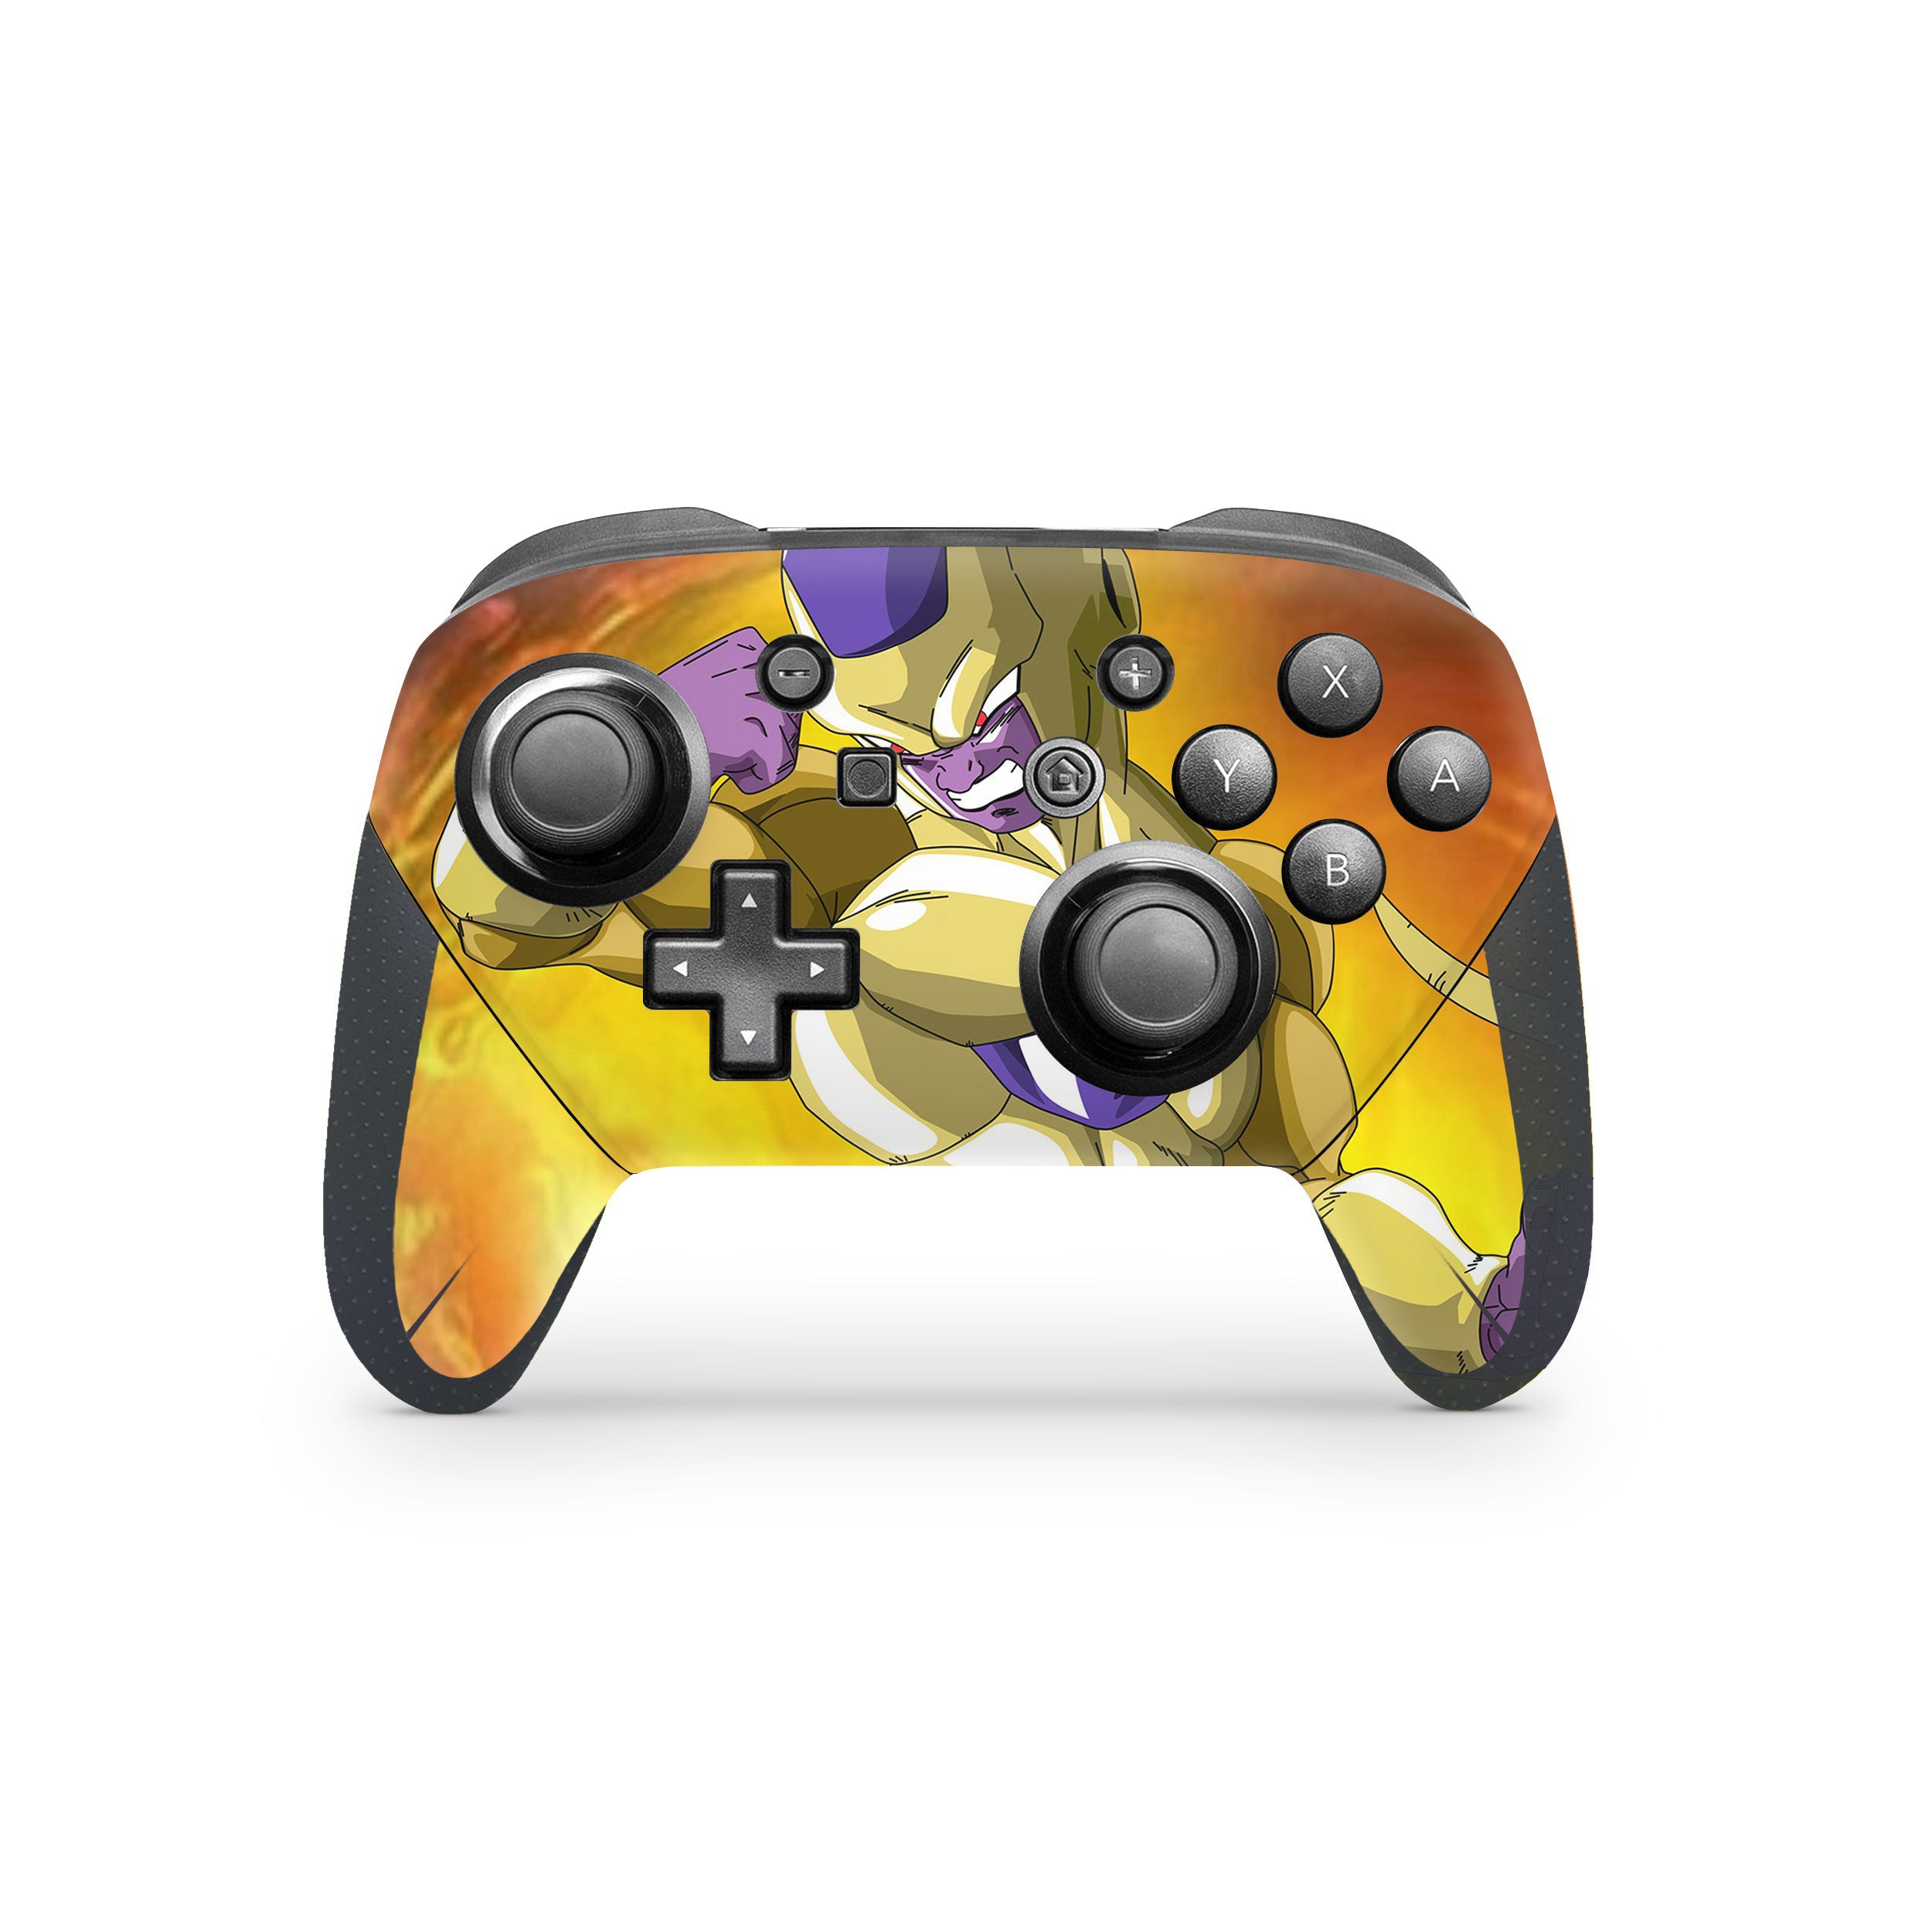 A video game skin featuring a Dragon Ball Super Frieza design for the Switch Pro Controller.